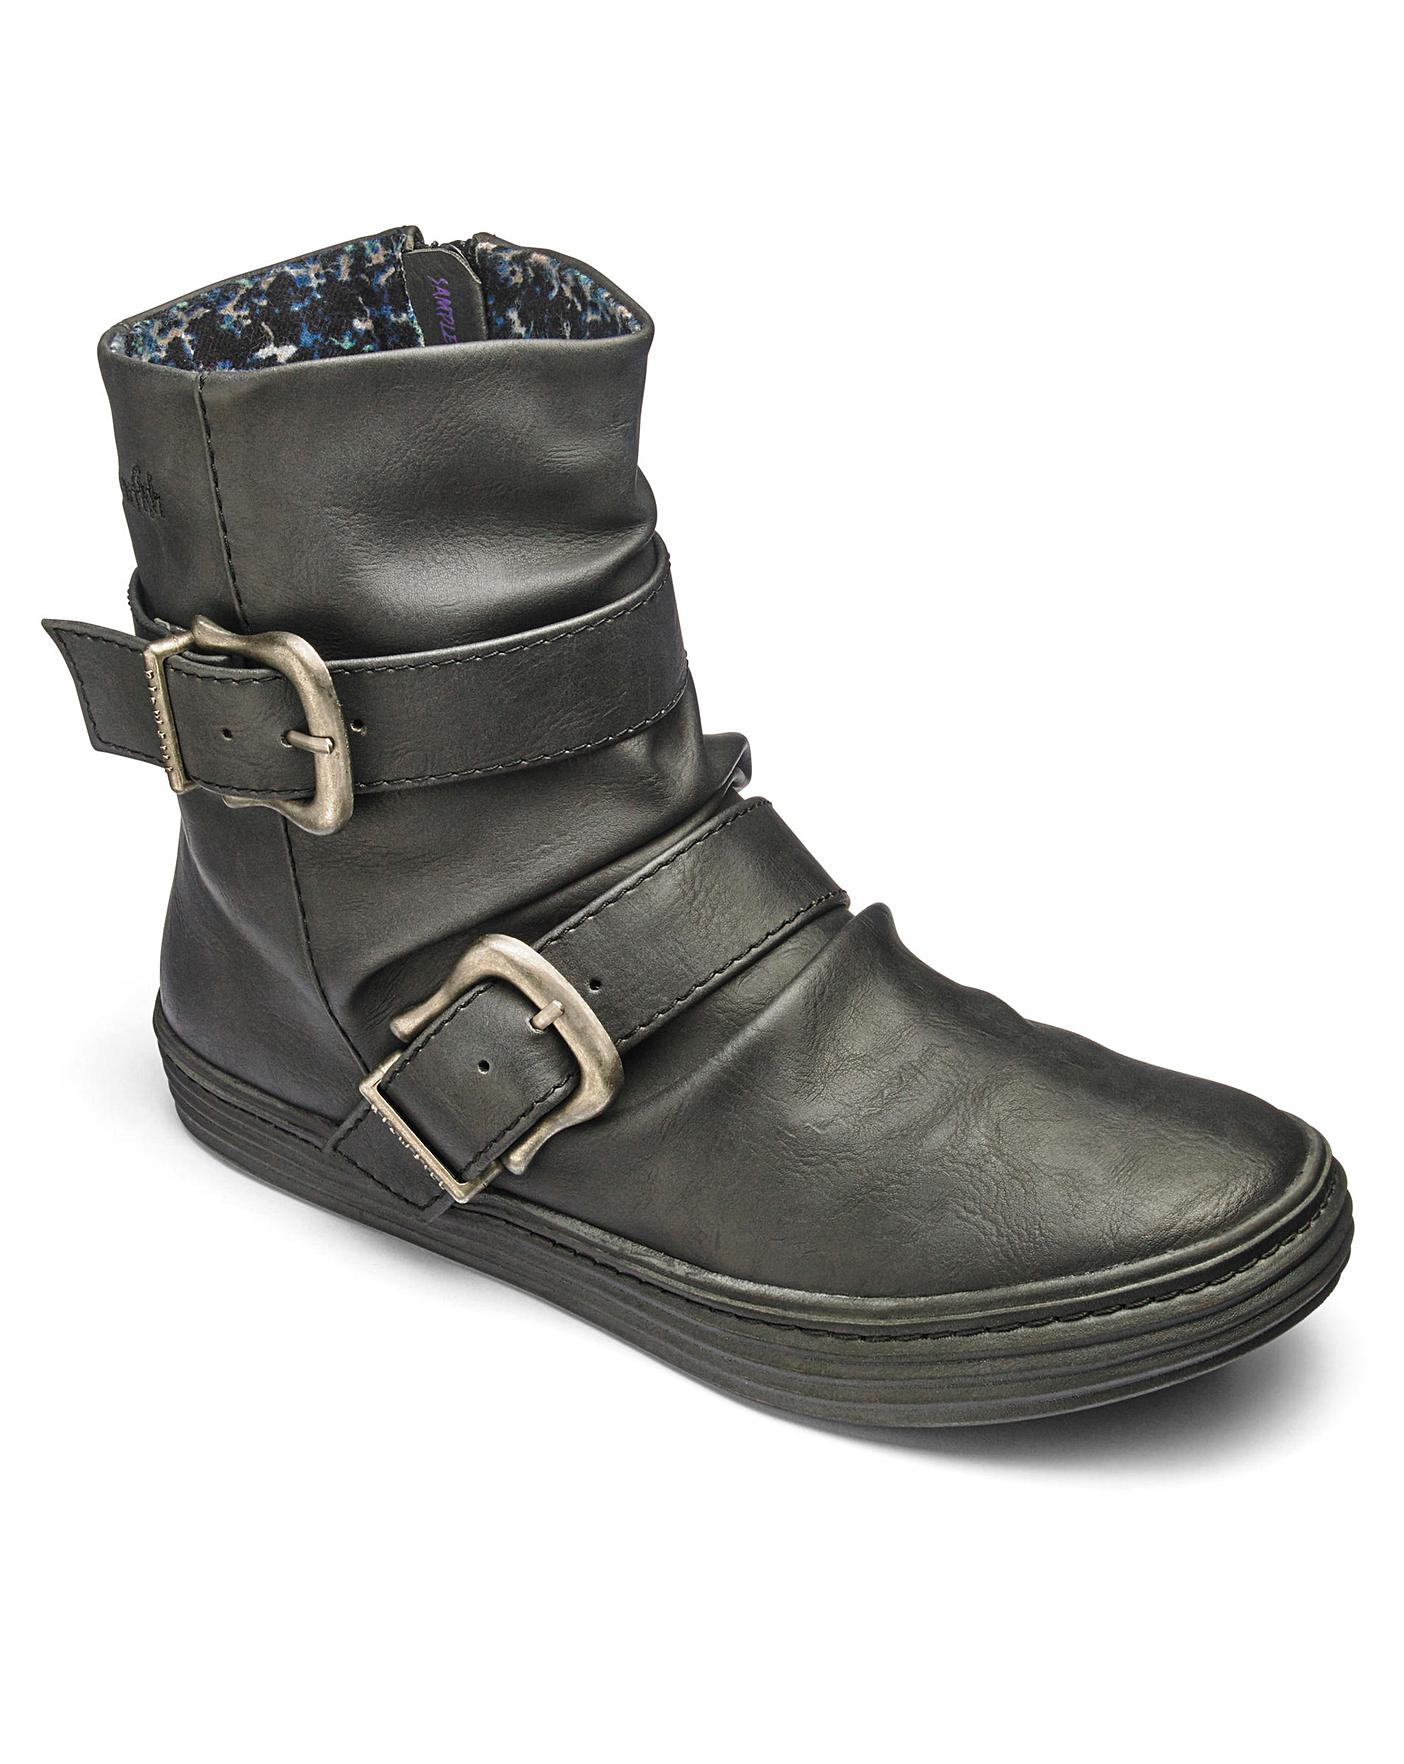 blowfish boots clearance